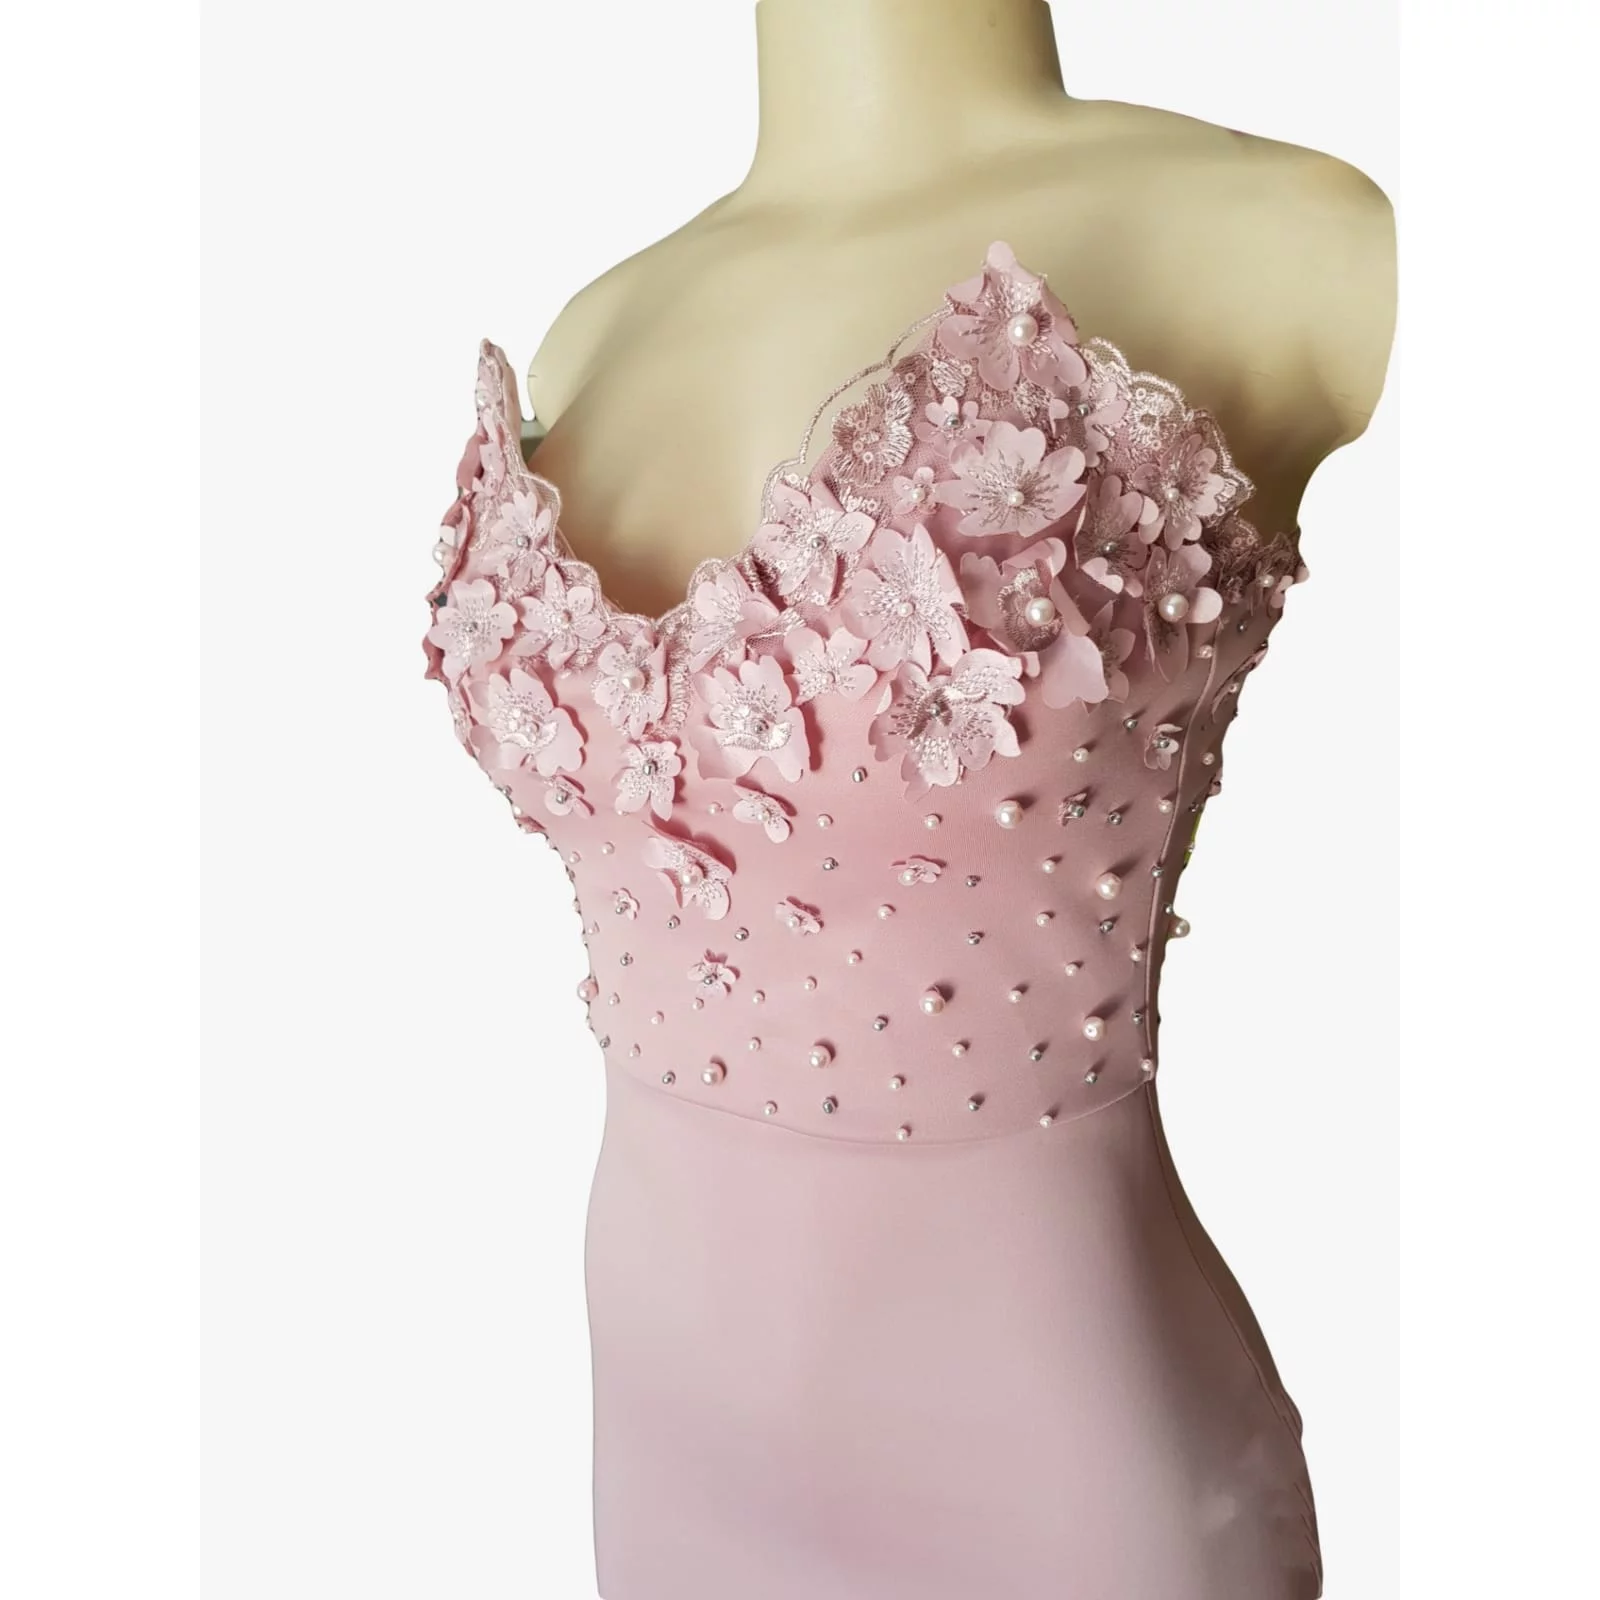 Pale pink soft mermaid prom dress 7 pale pink soft mermaid prom dress, bodice detailed with pearls and 3d lace, with a train and detachable neck strap.